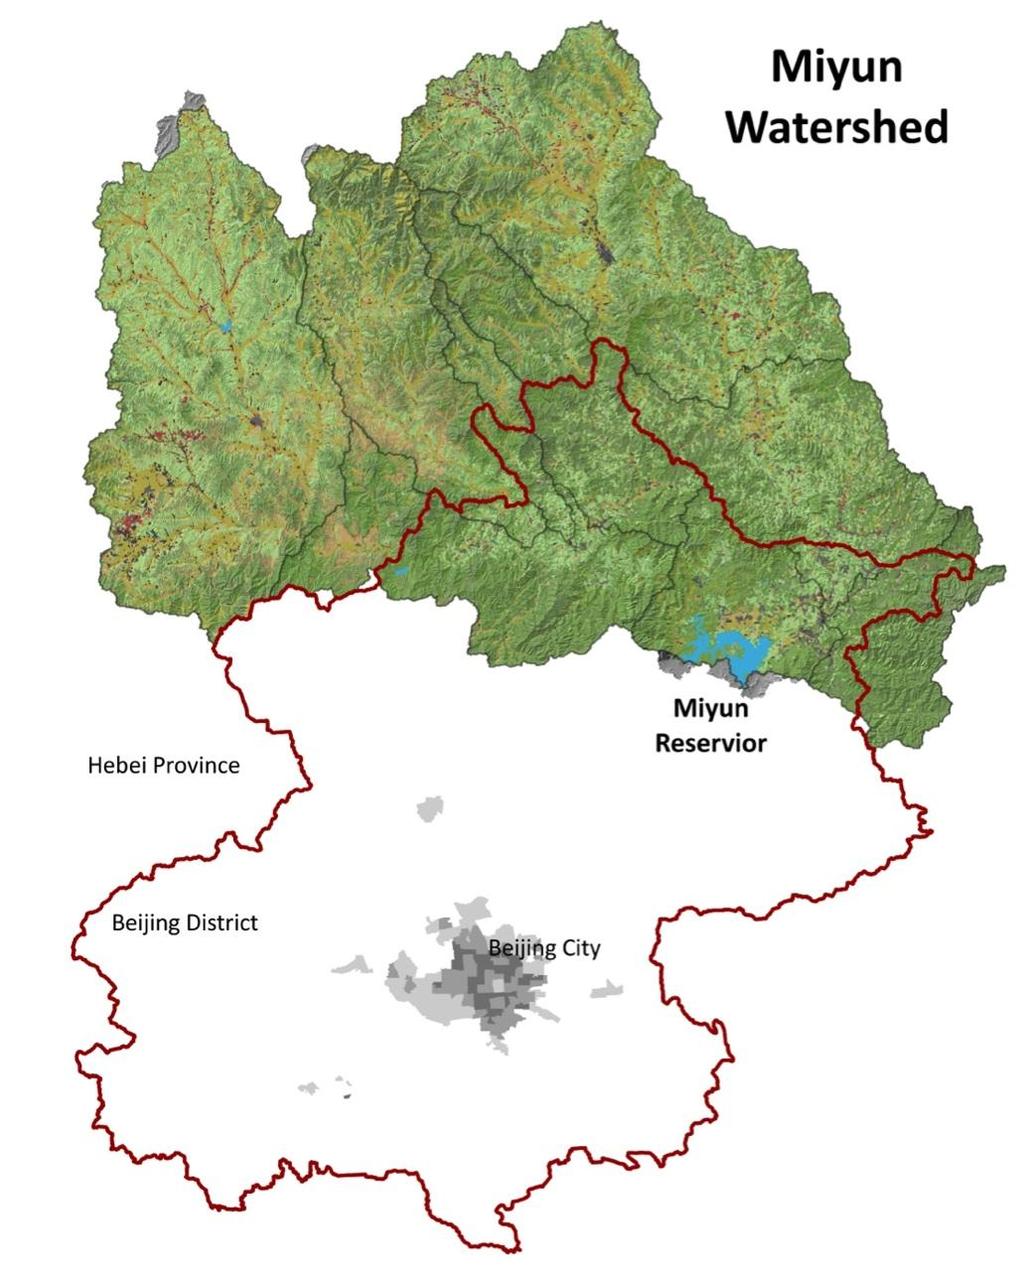 Miyun Watershed Mountainous forest, Great Wall of China Two major river systems 15,800 km 2 (Wales =